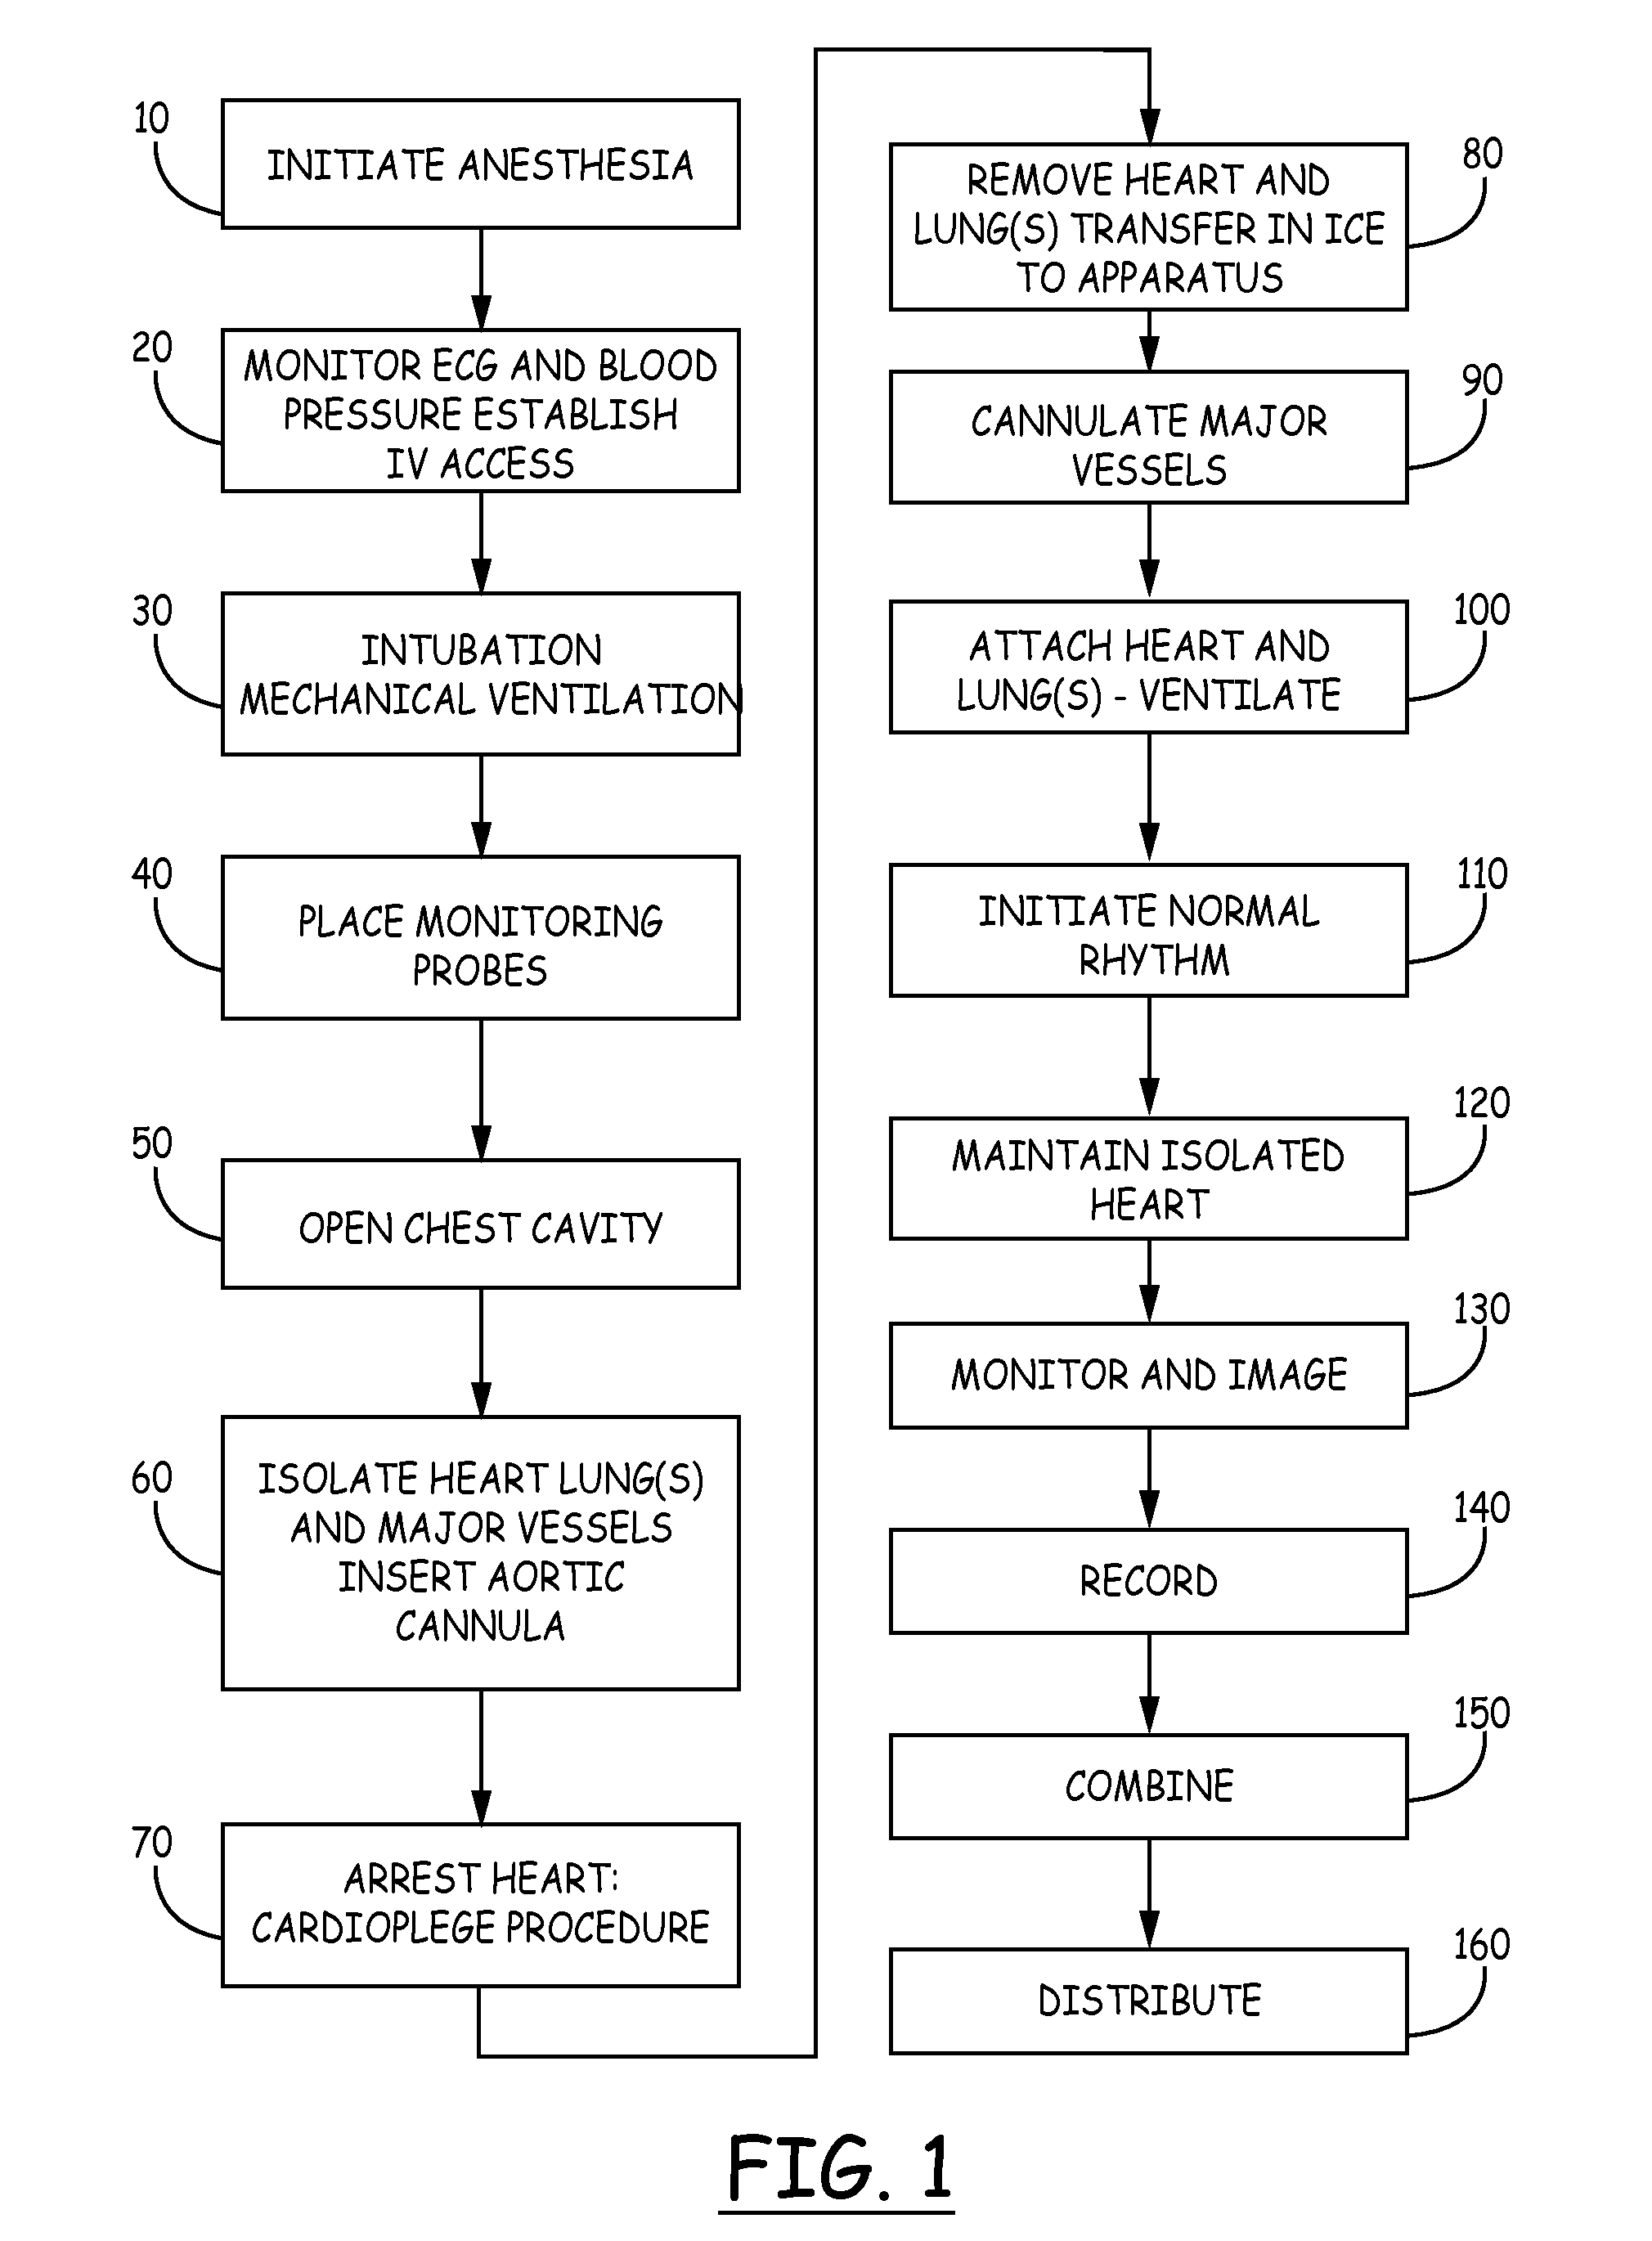 Heart-lung preparation and method of use